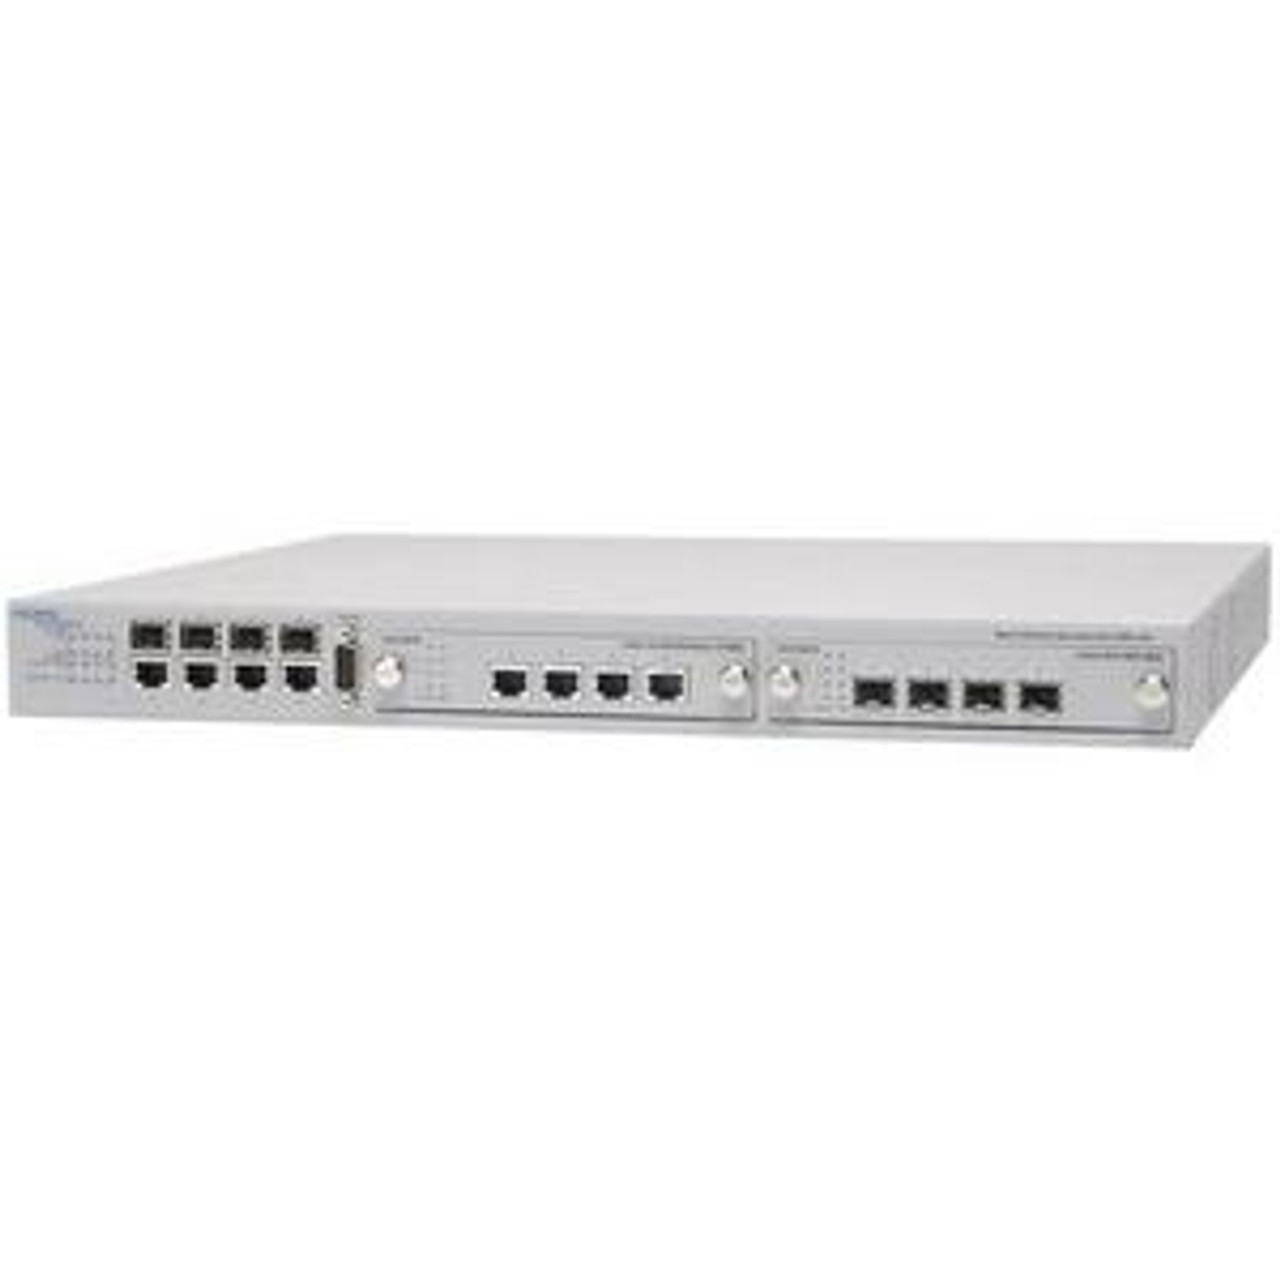 DJ1412014 Nortel 1648T Fast Ethernet Routing External Switch with 48-Ports 10/100TX Ports 4 SFP (Refurbished)